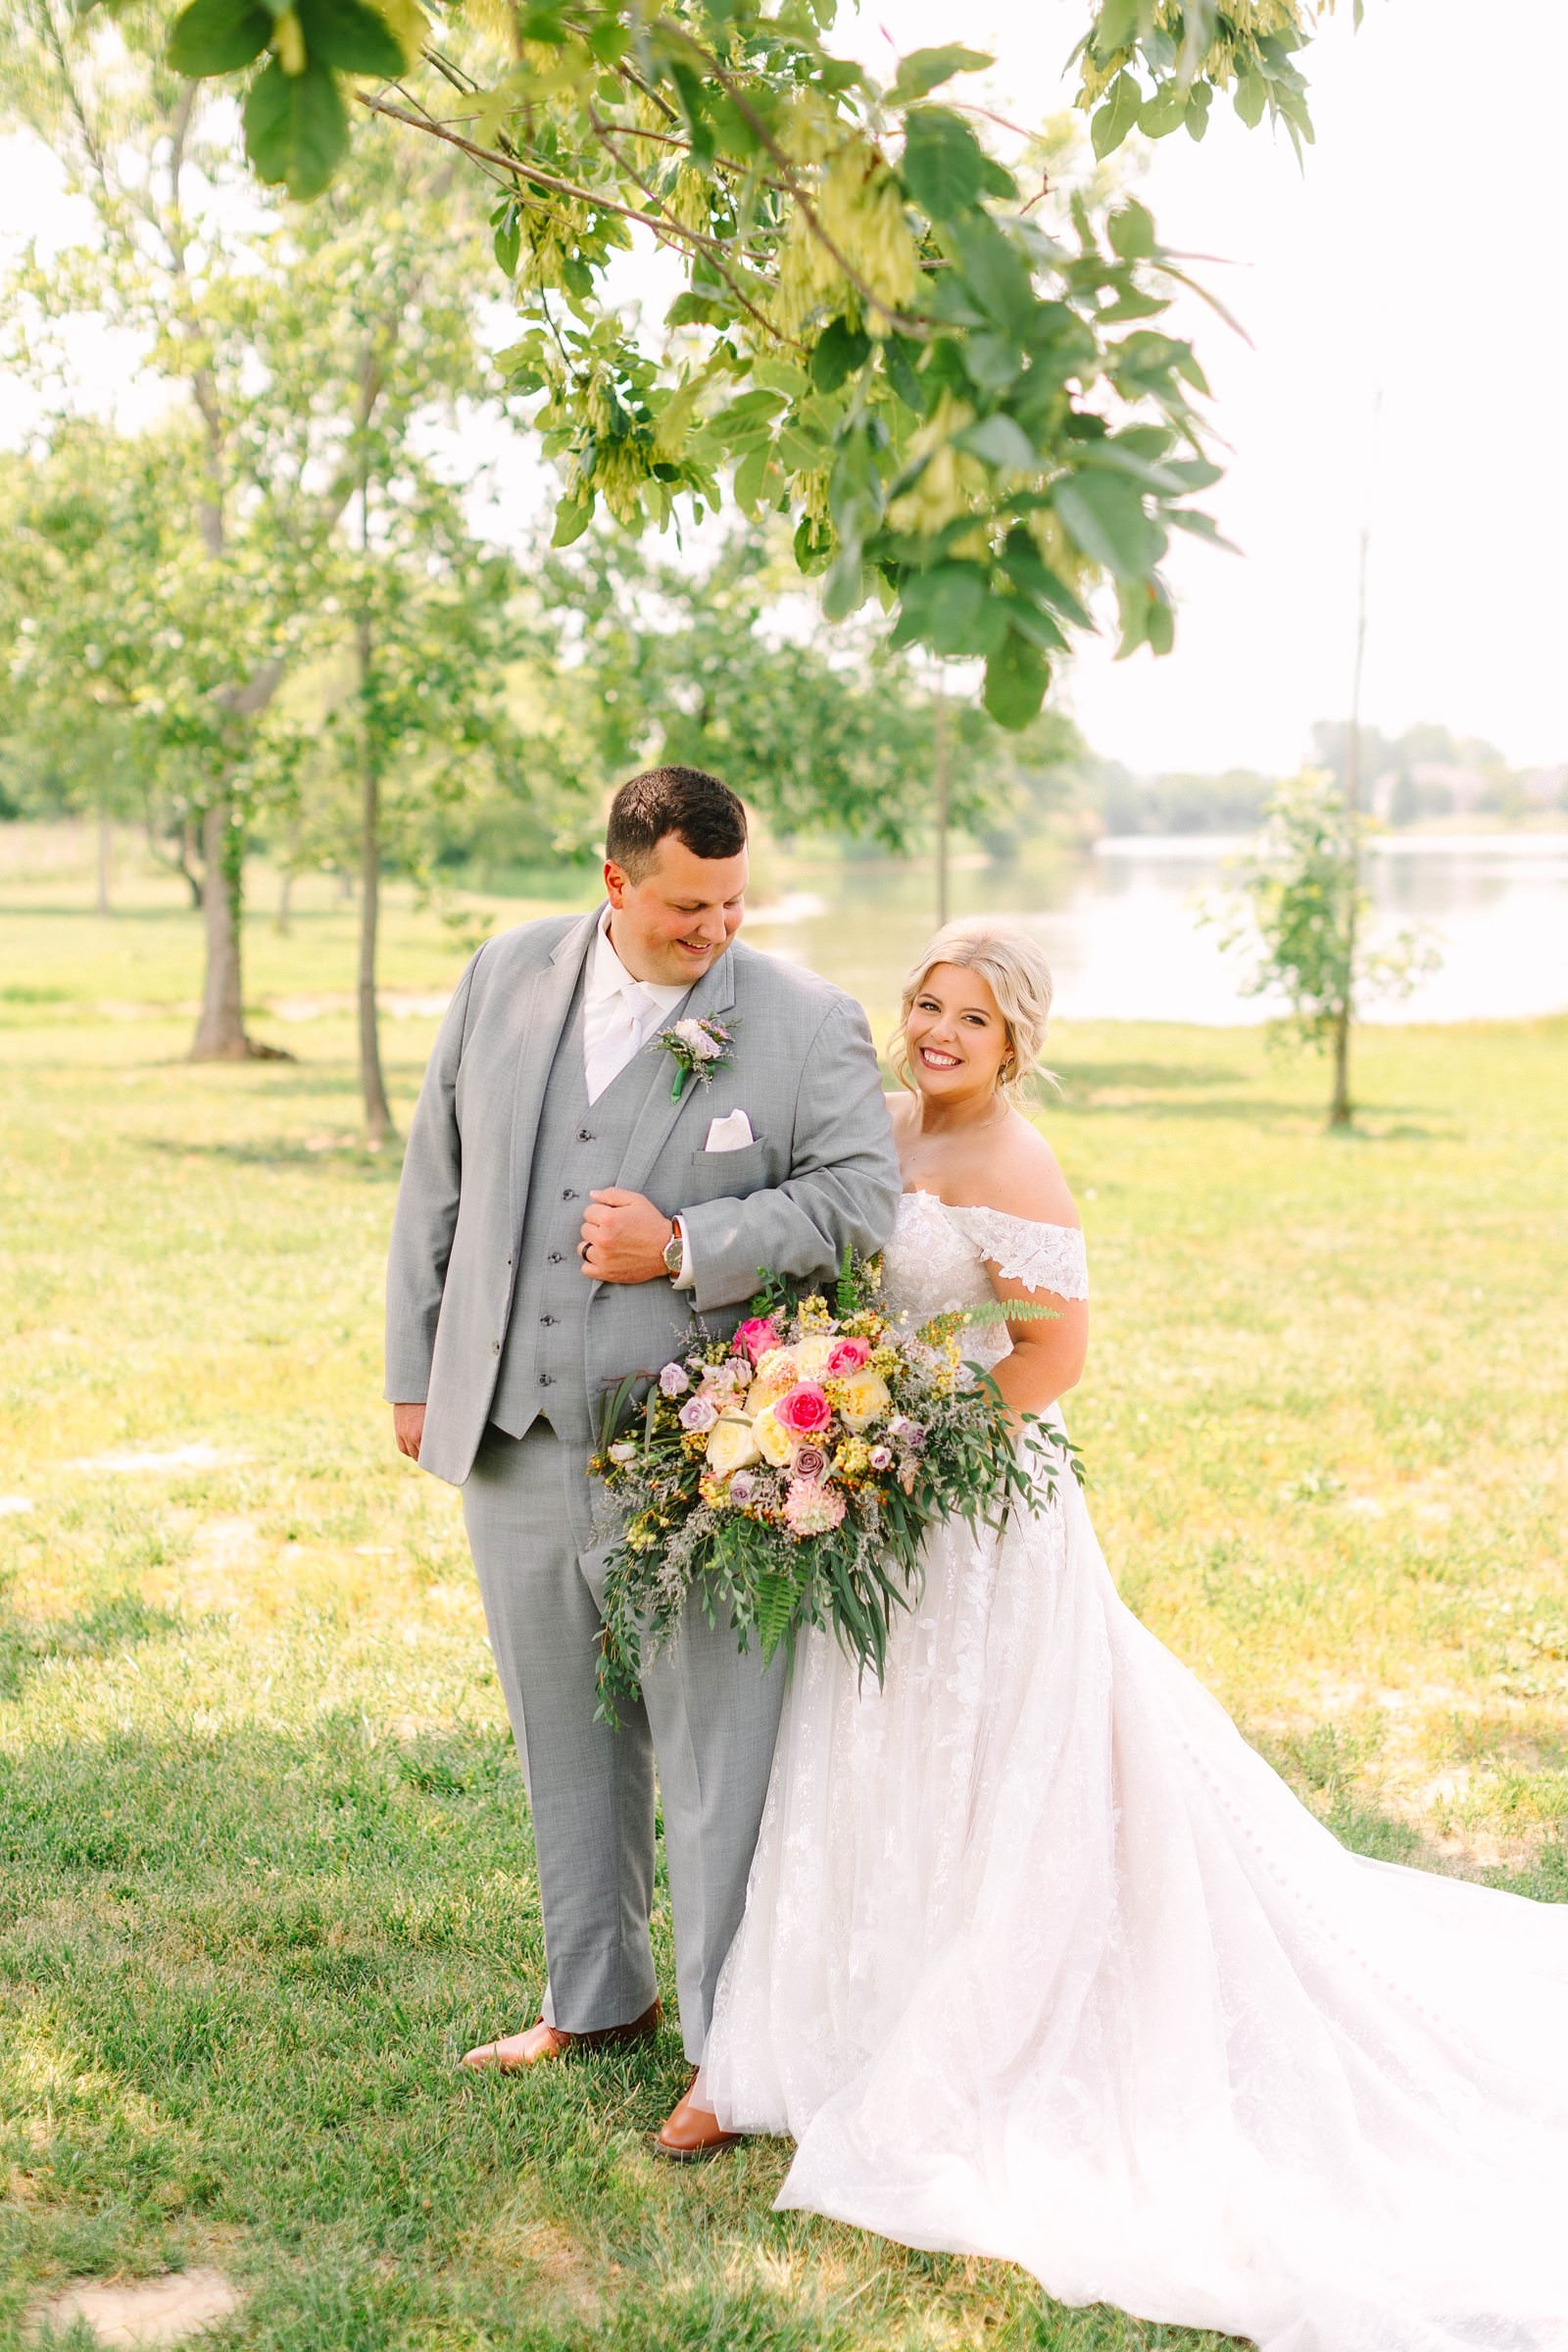 A Sunny Summer Wedding at Friedman Park in Newburgh Indiana | Paige and Dylan | Bret and Brandie Photography081.jpg